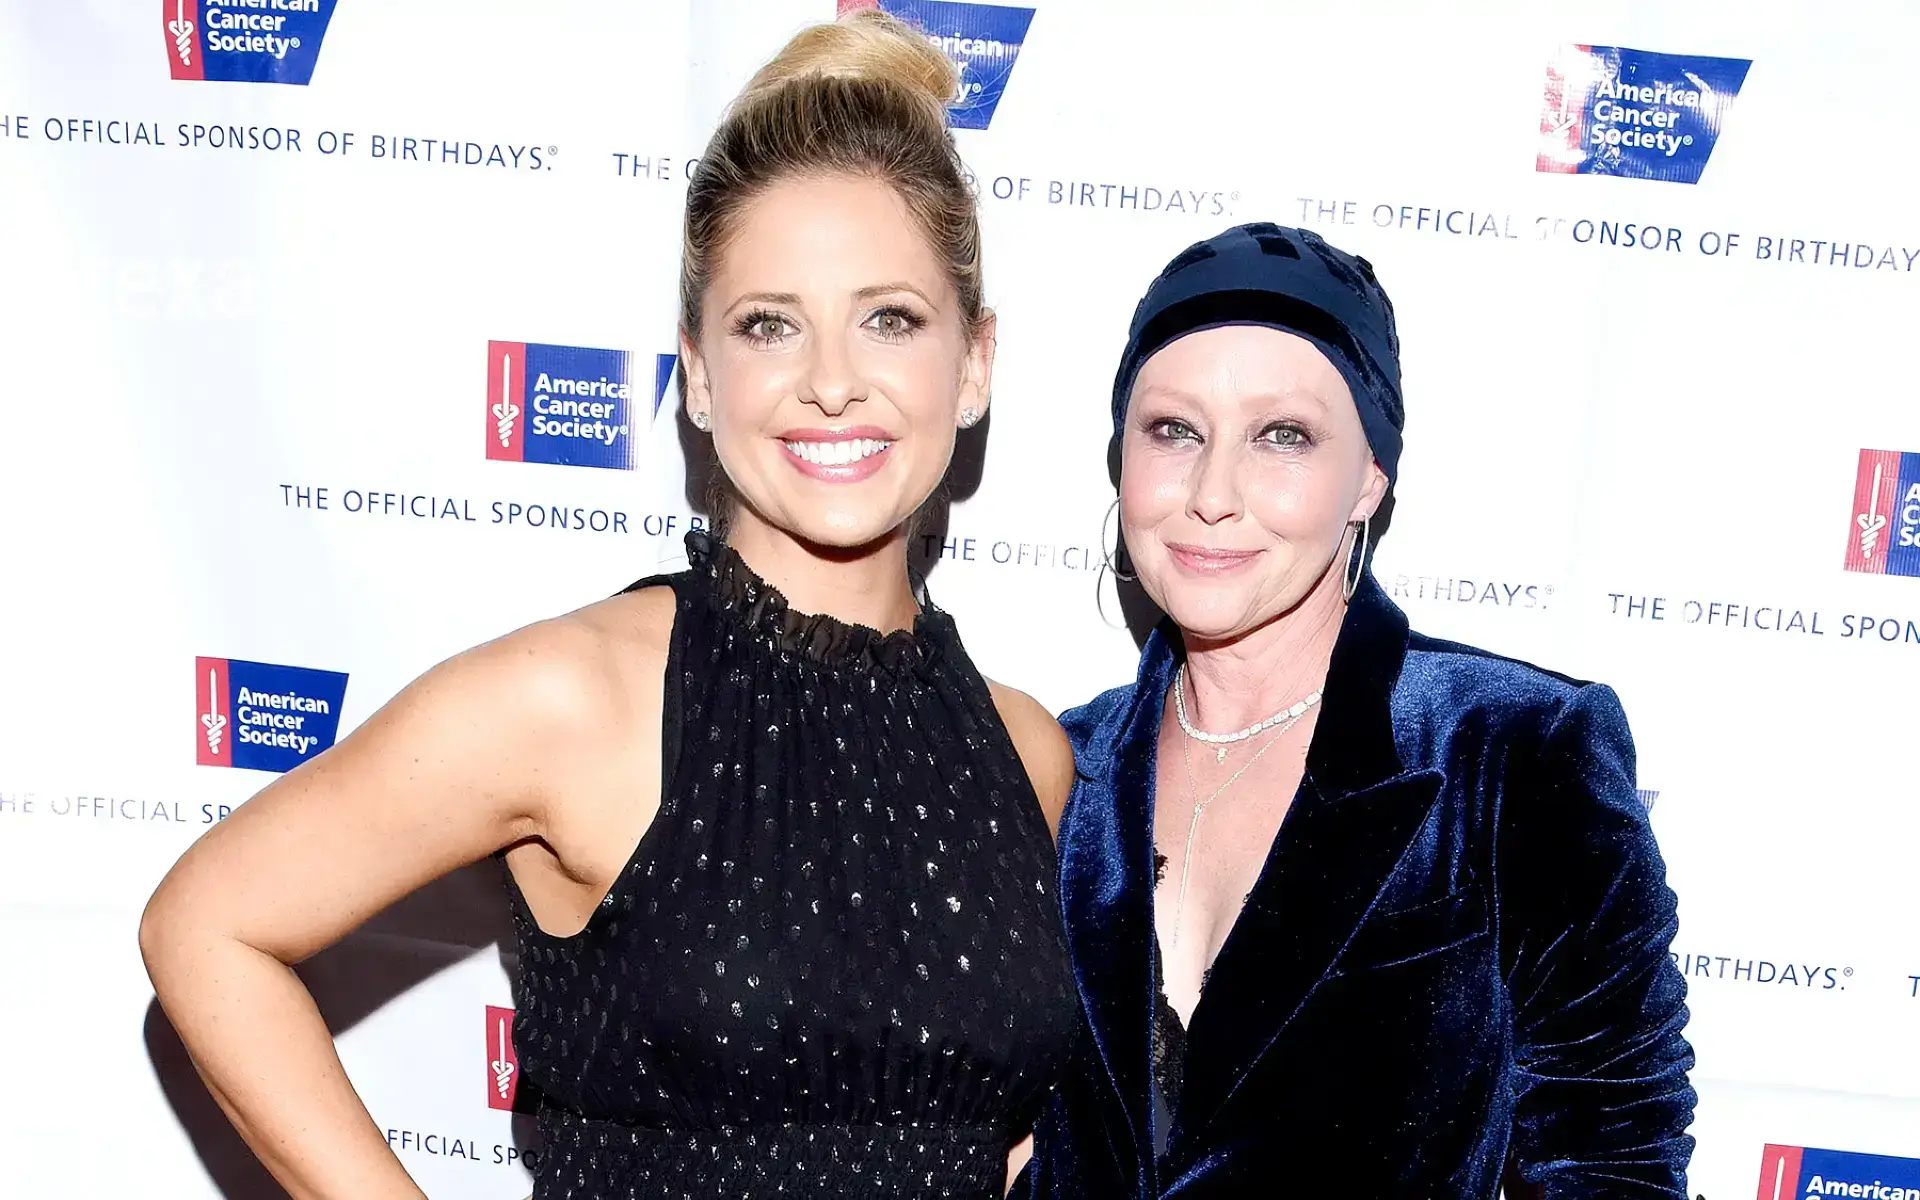 Sarah Michelle Gellar Stands by Shannen Doherty: A Tale of Friendship and Support